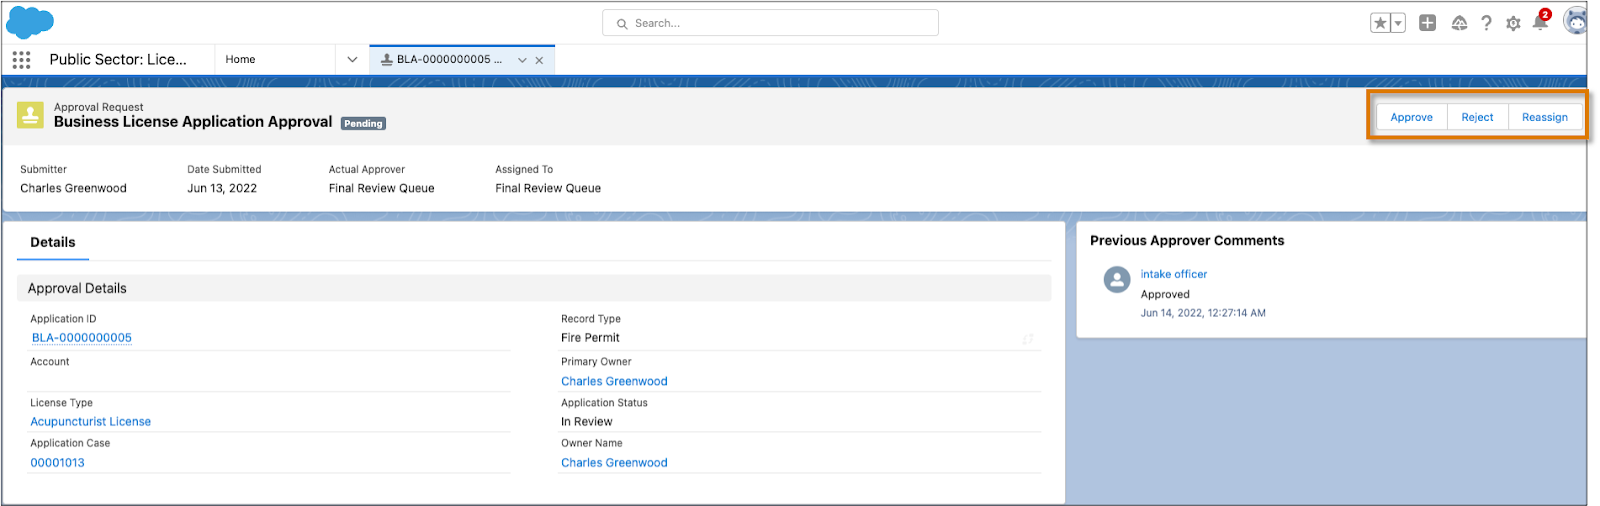 Screen capture of a pending approval request